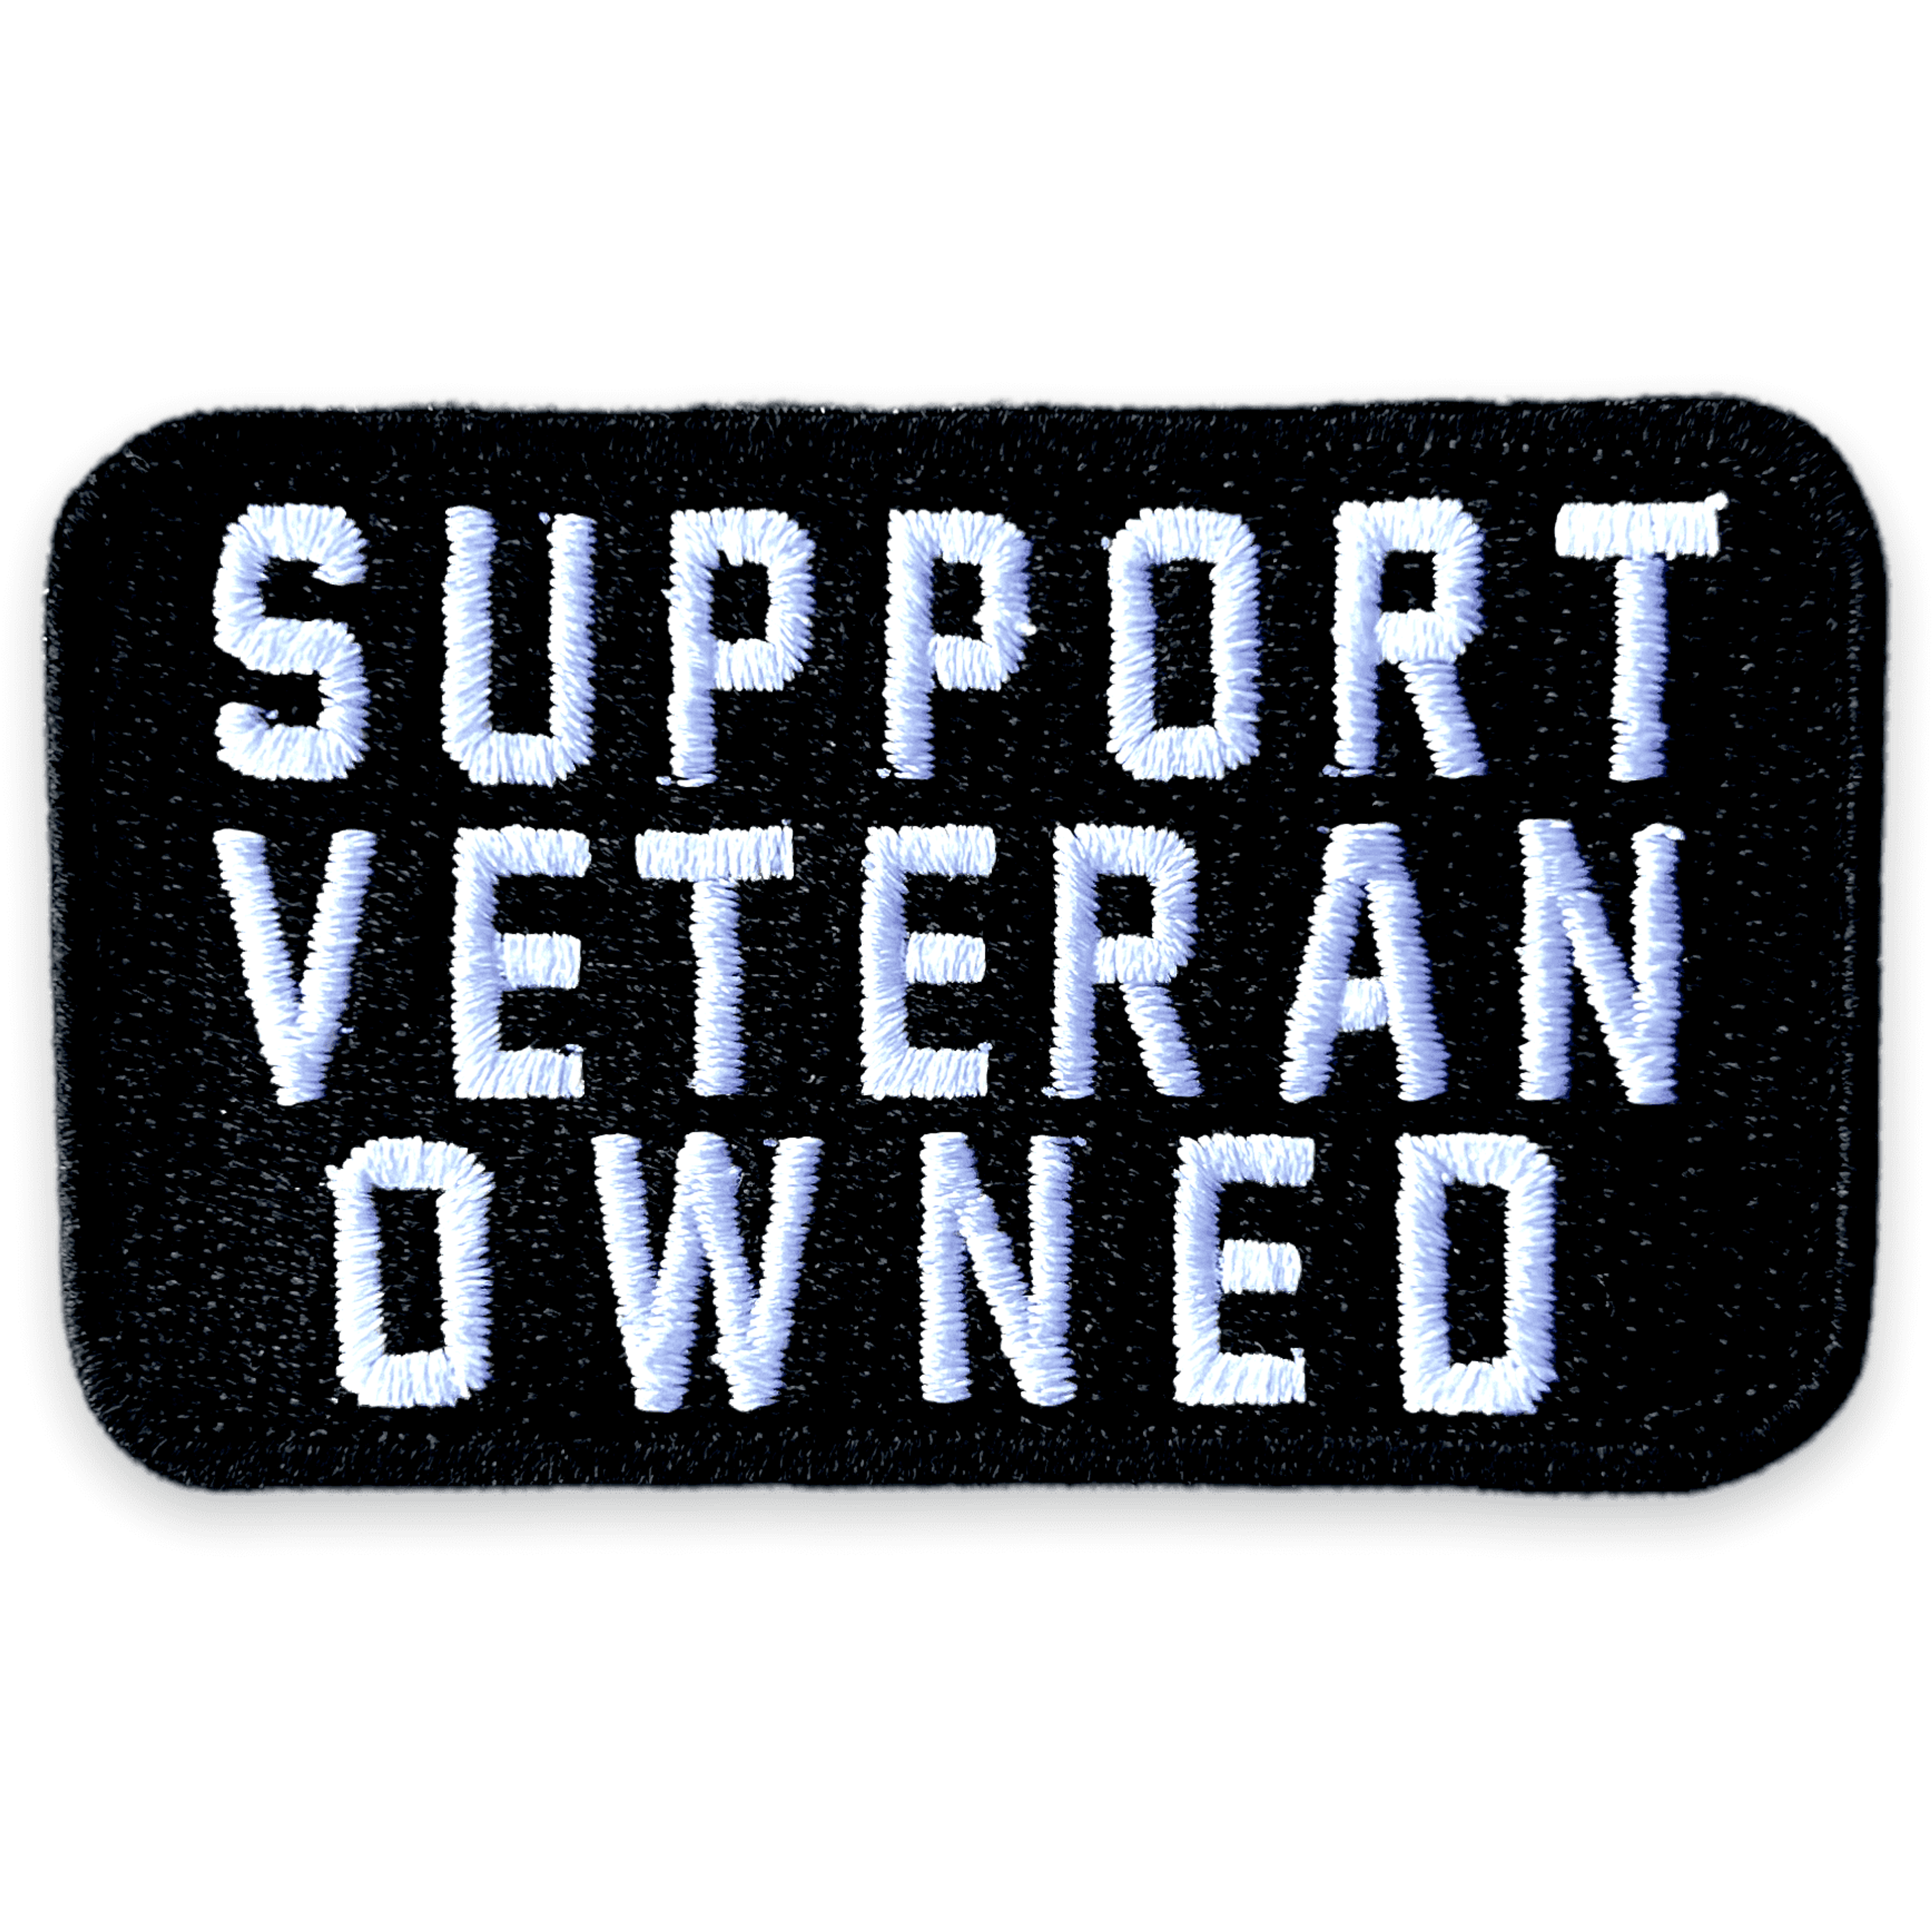 1 Custom Embroidered Patch Factory - Veteran Owned